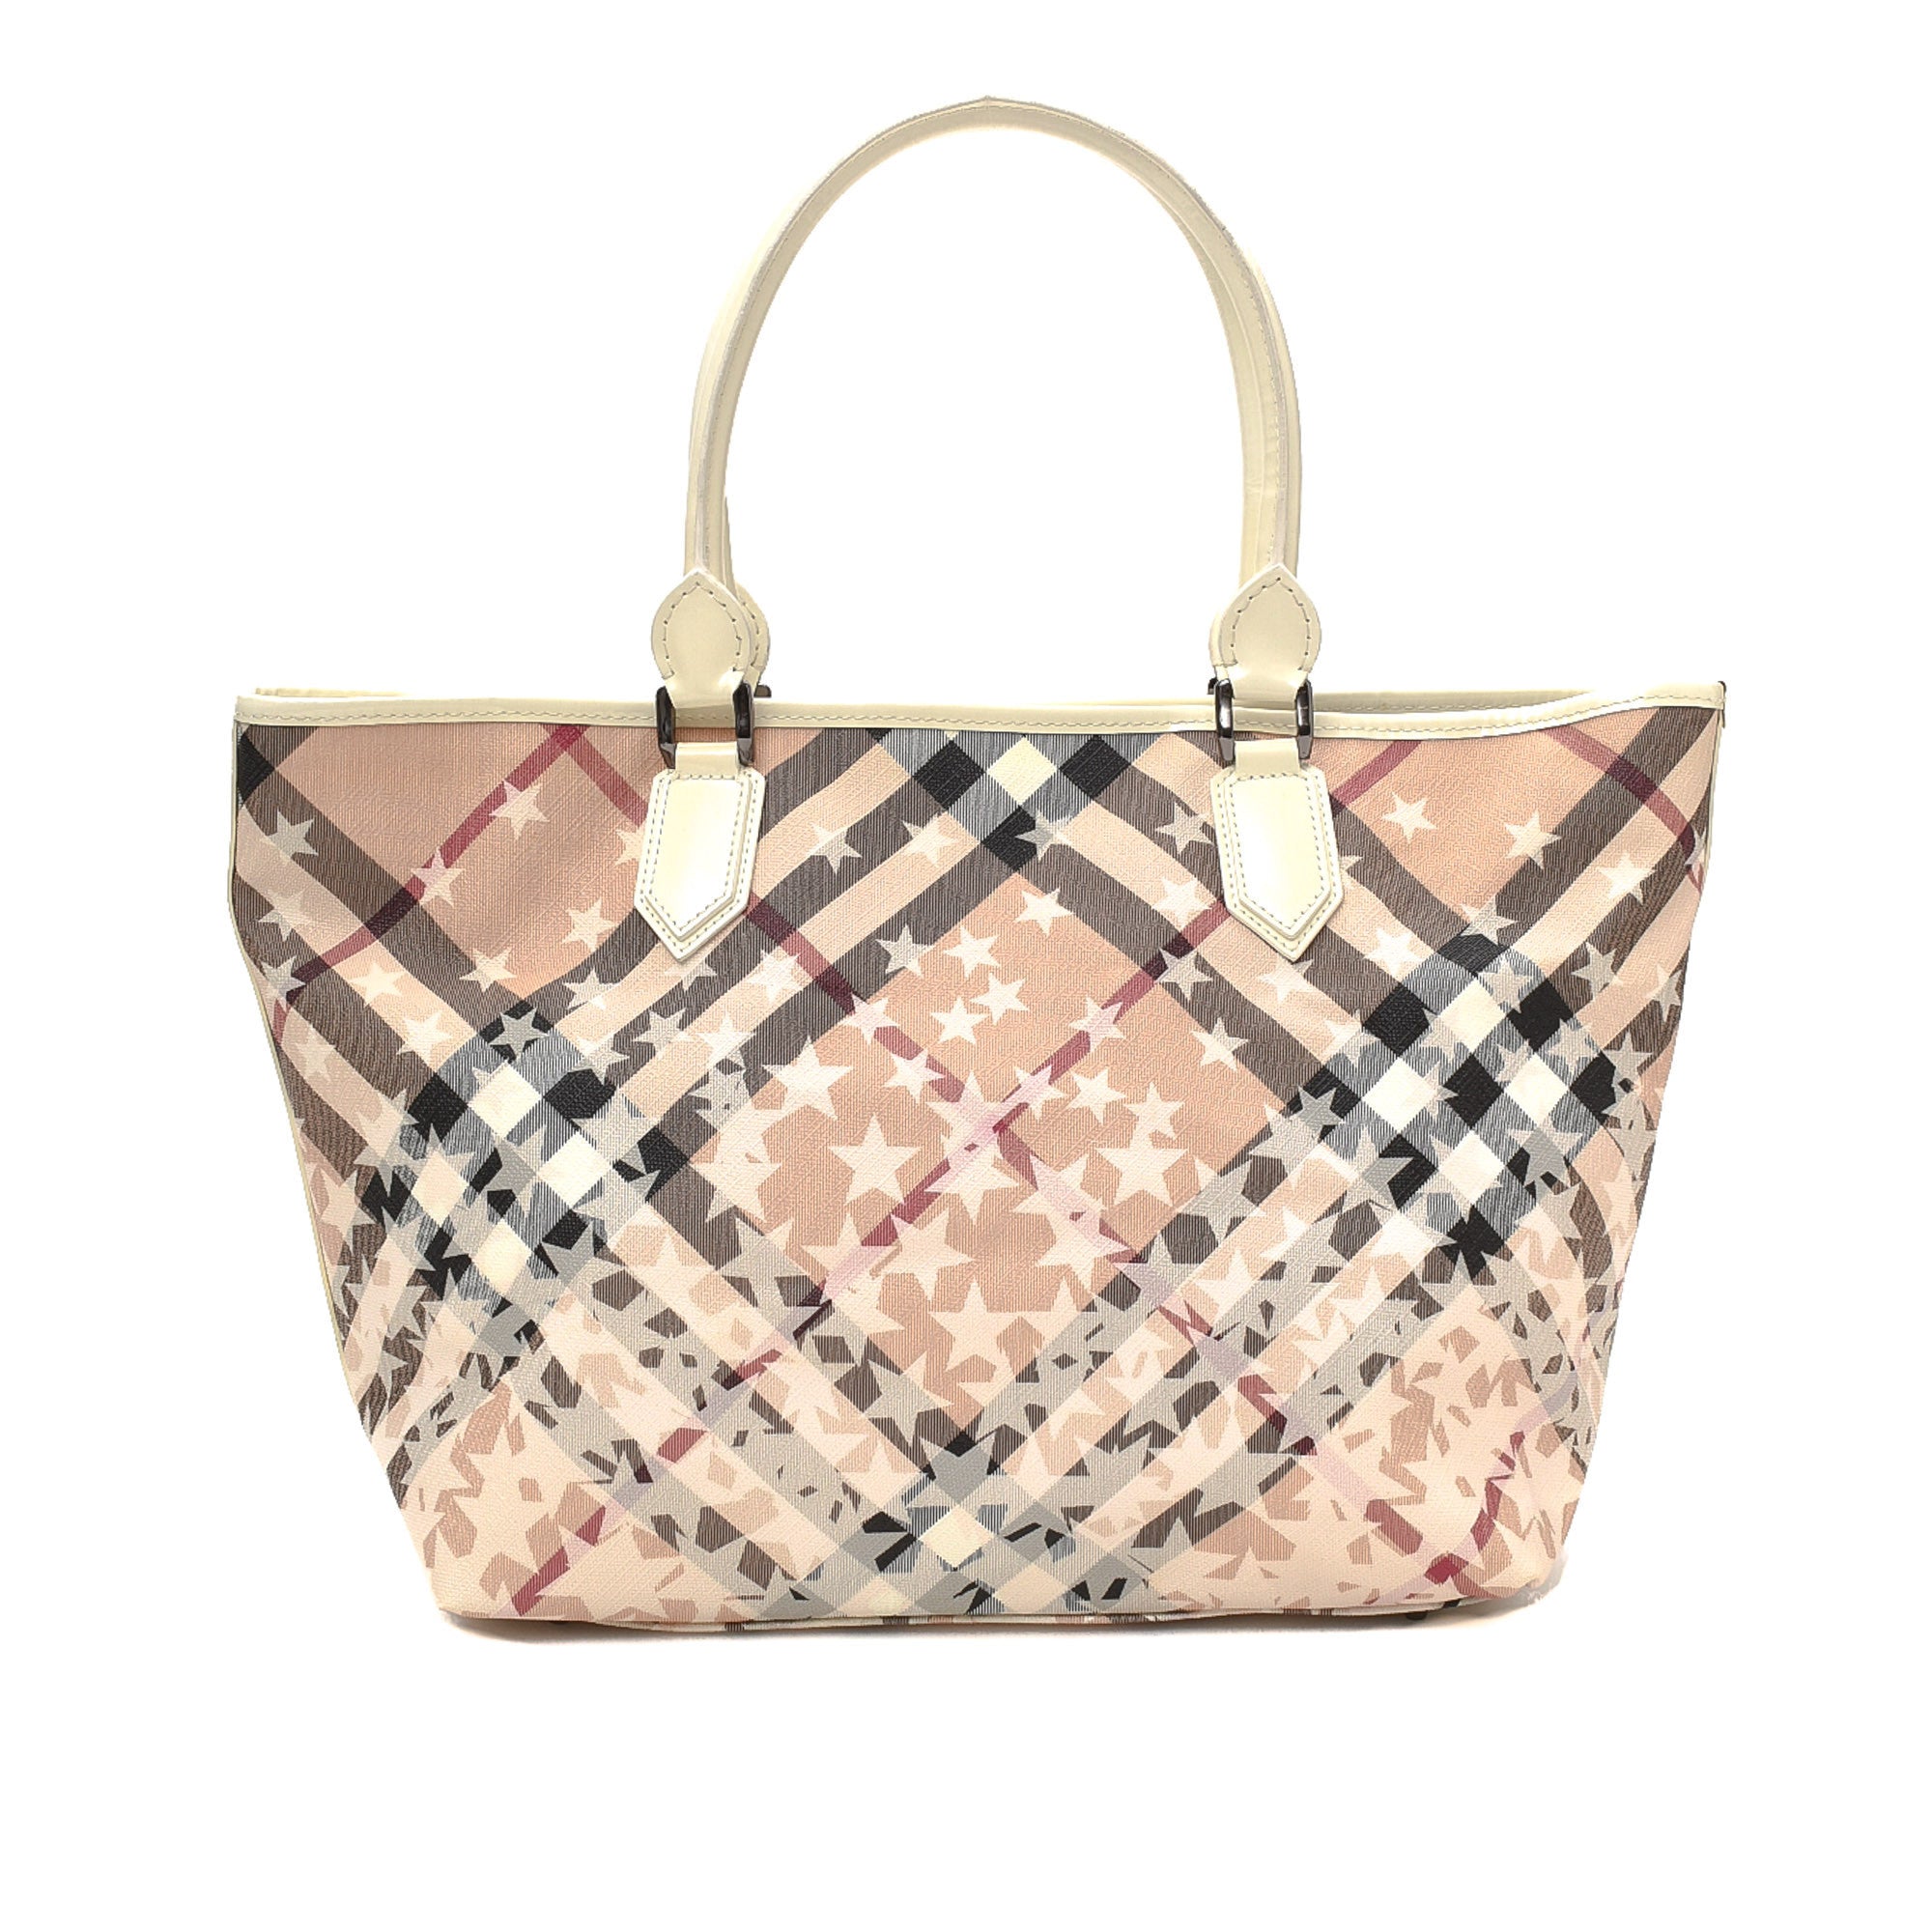 Burberry Nova Check Tote Bag in Beige, Lord & Taylor